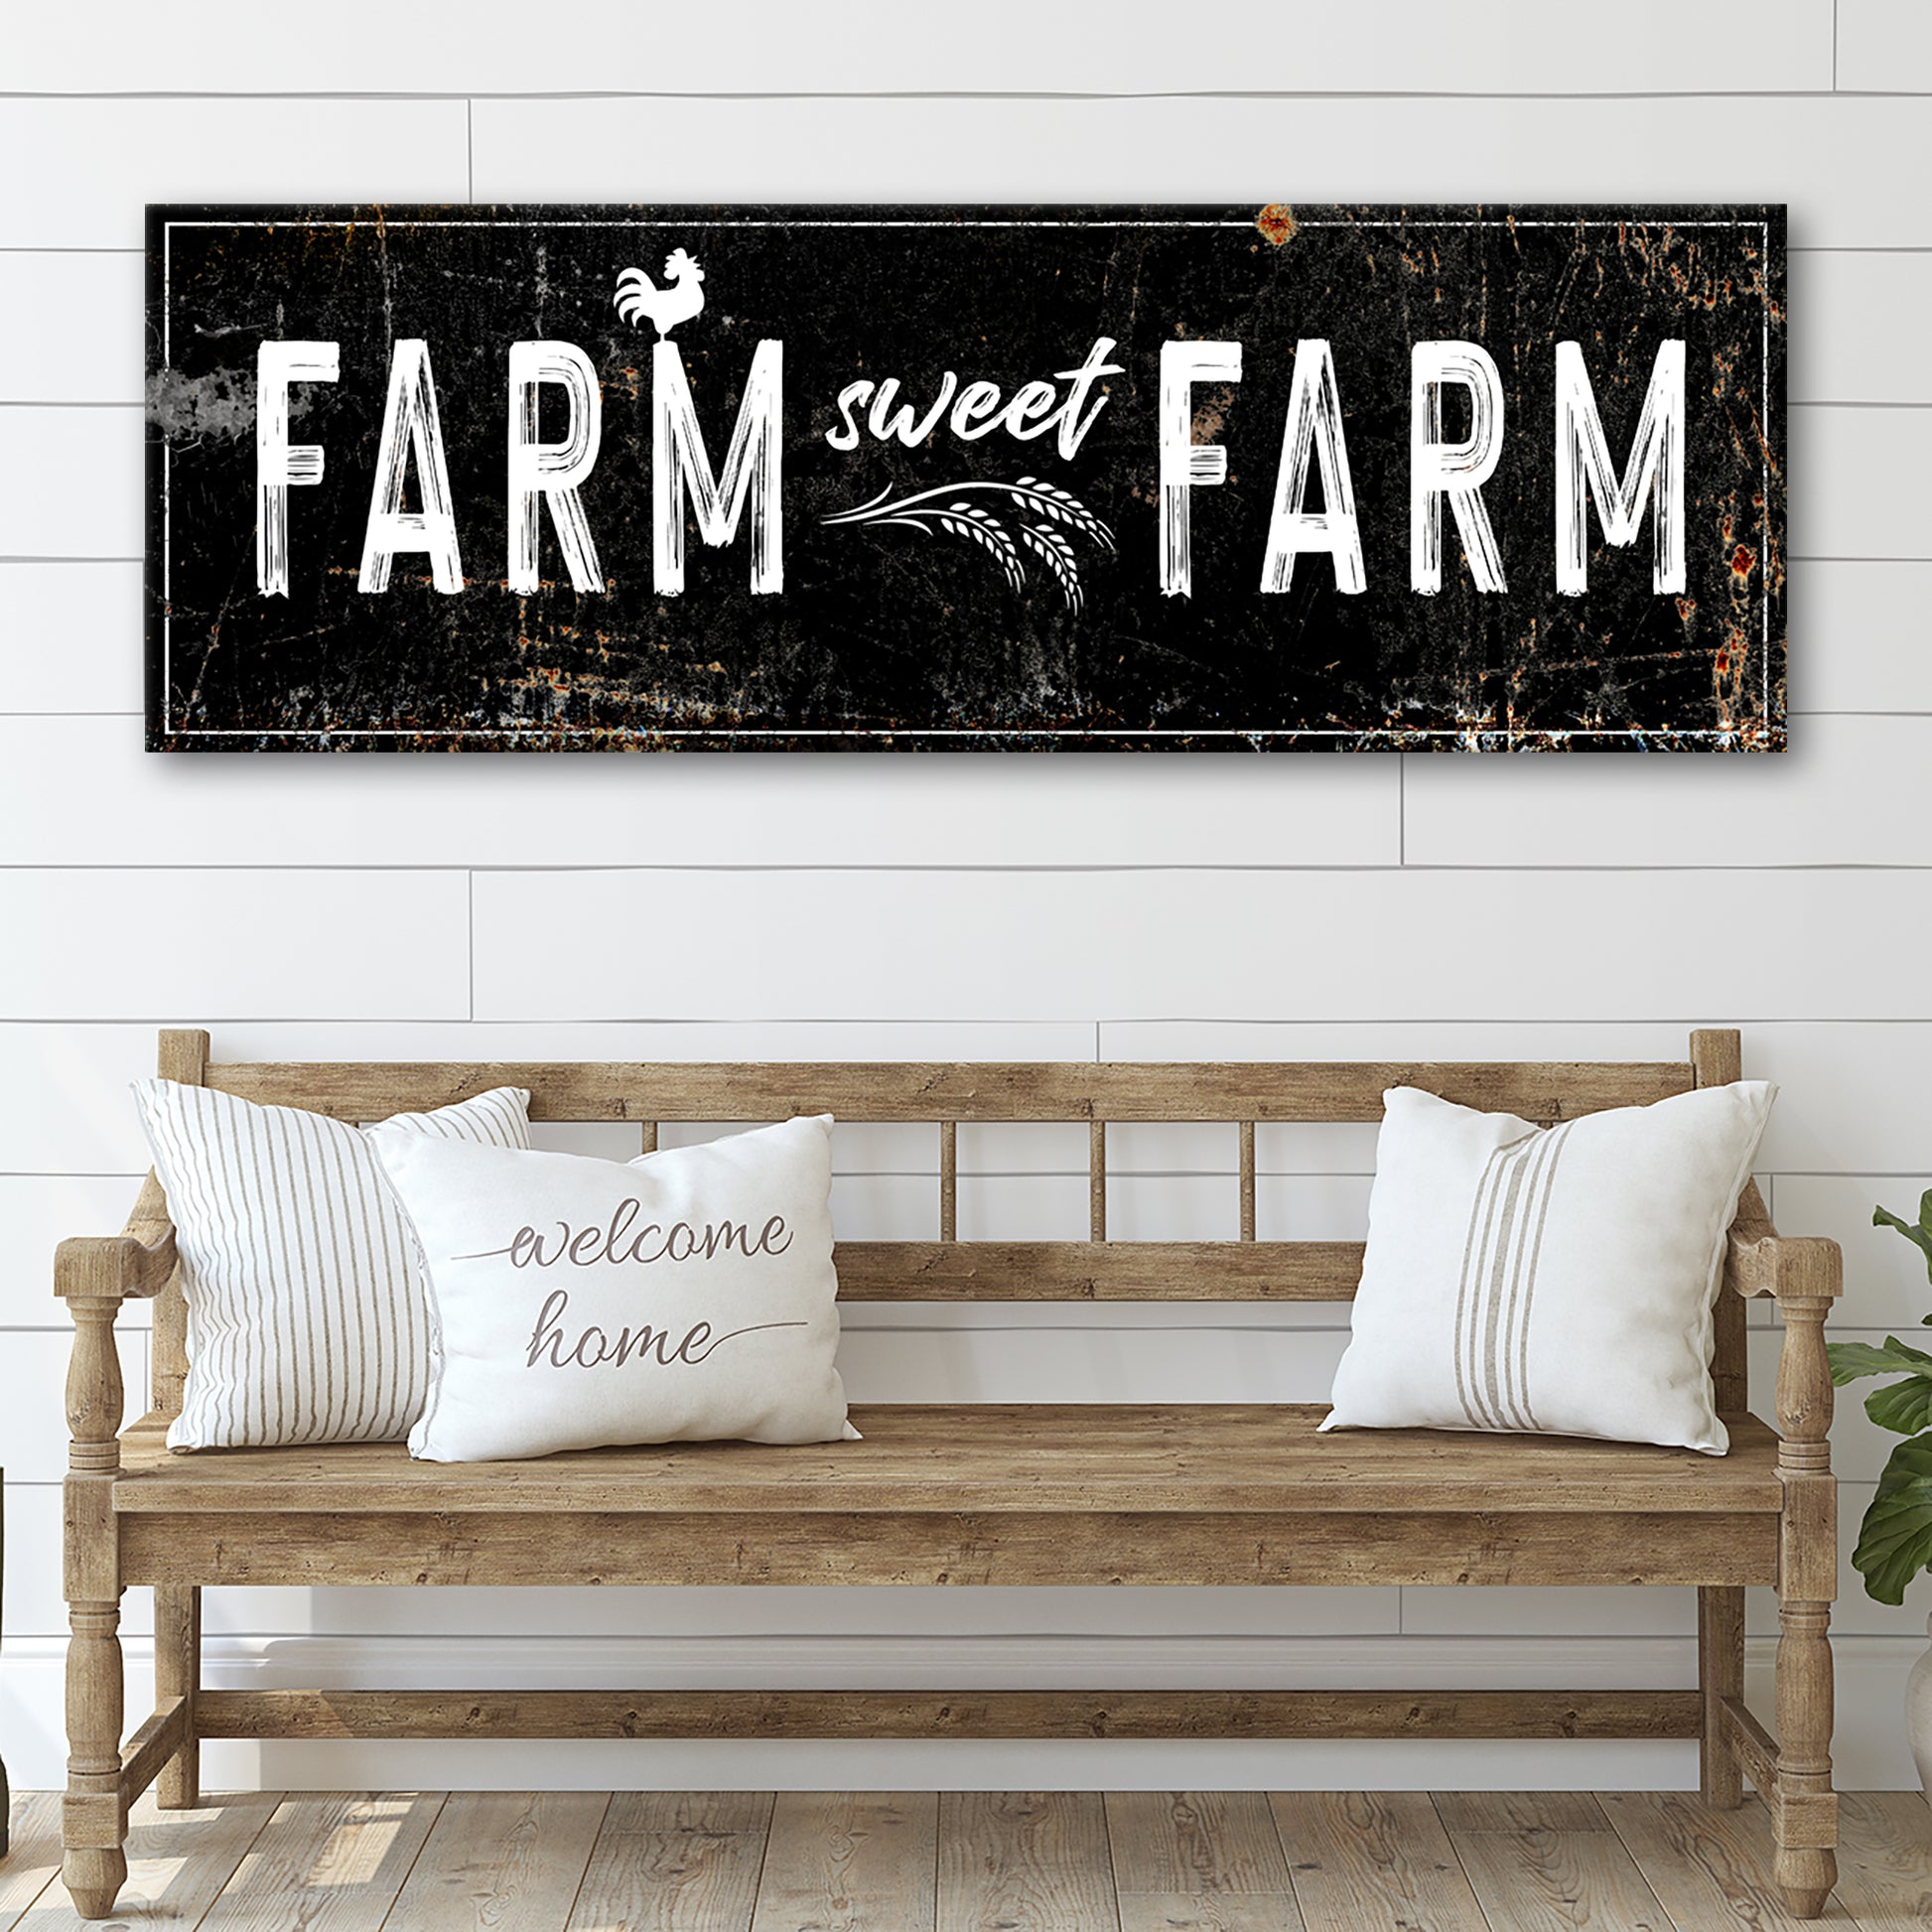 Farm Sweet Farm Sign Style 2 - Image by Tailored Canvases